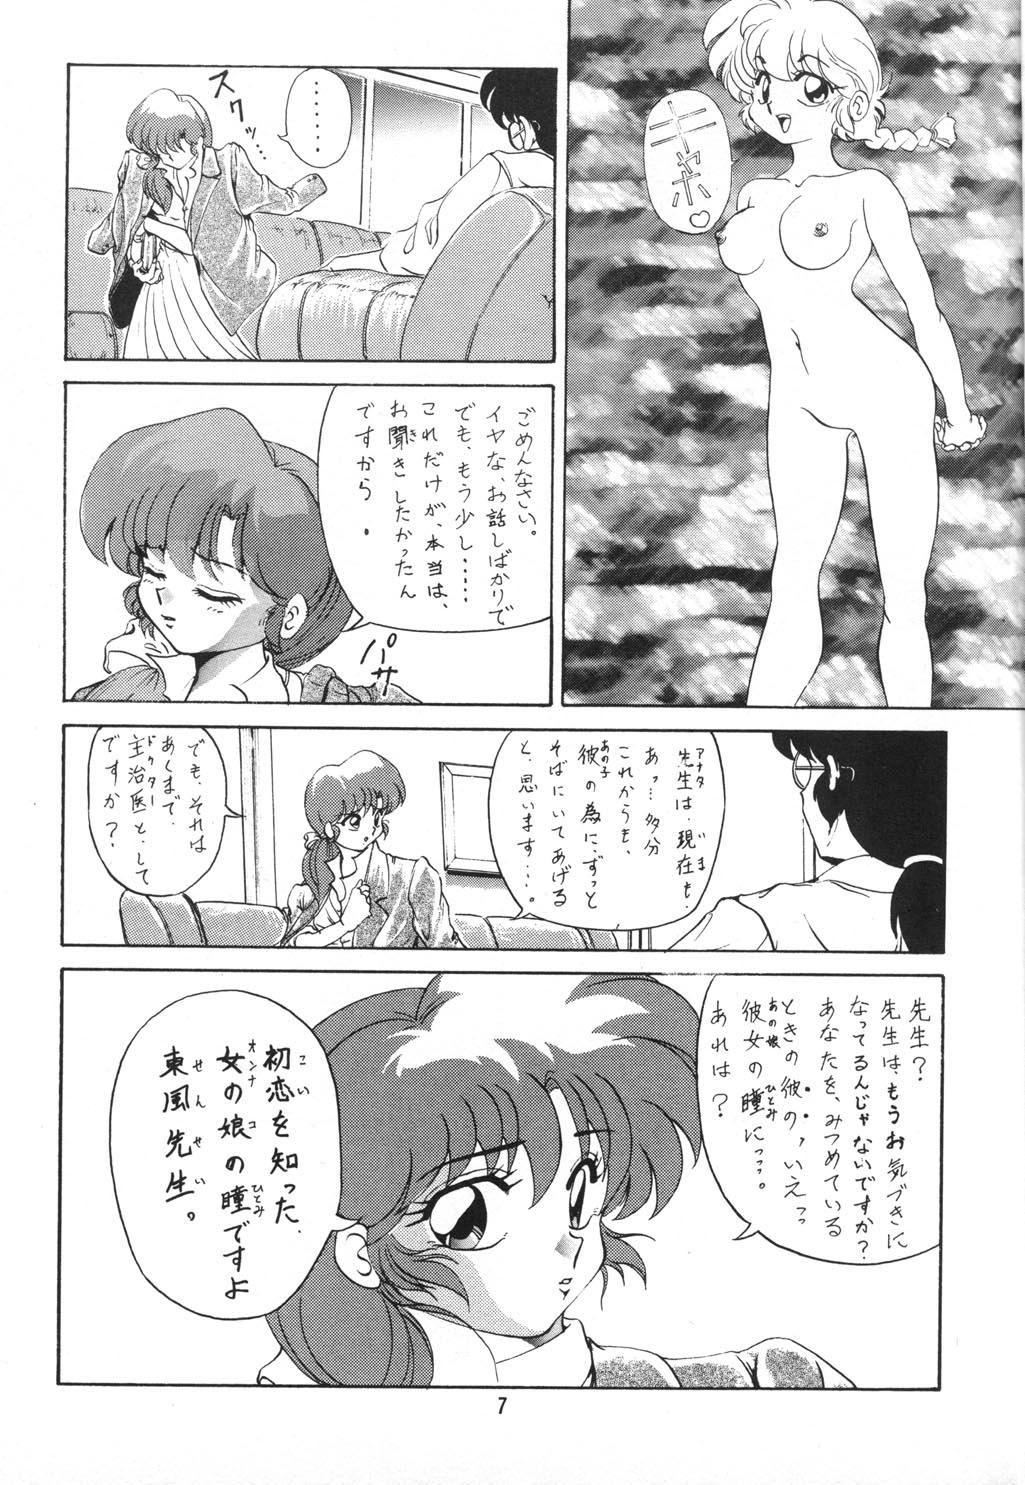 Missionary Position Porn Ambivalence 16 - Ranma 12 Young Petite Porn - Page 7